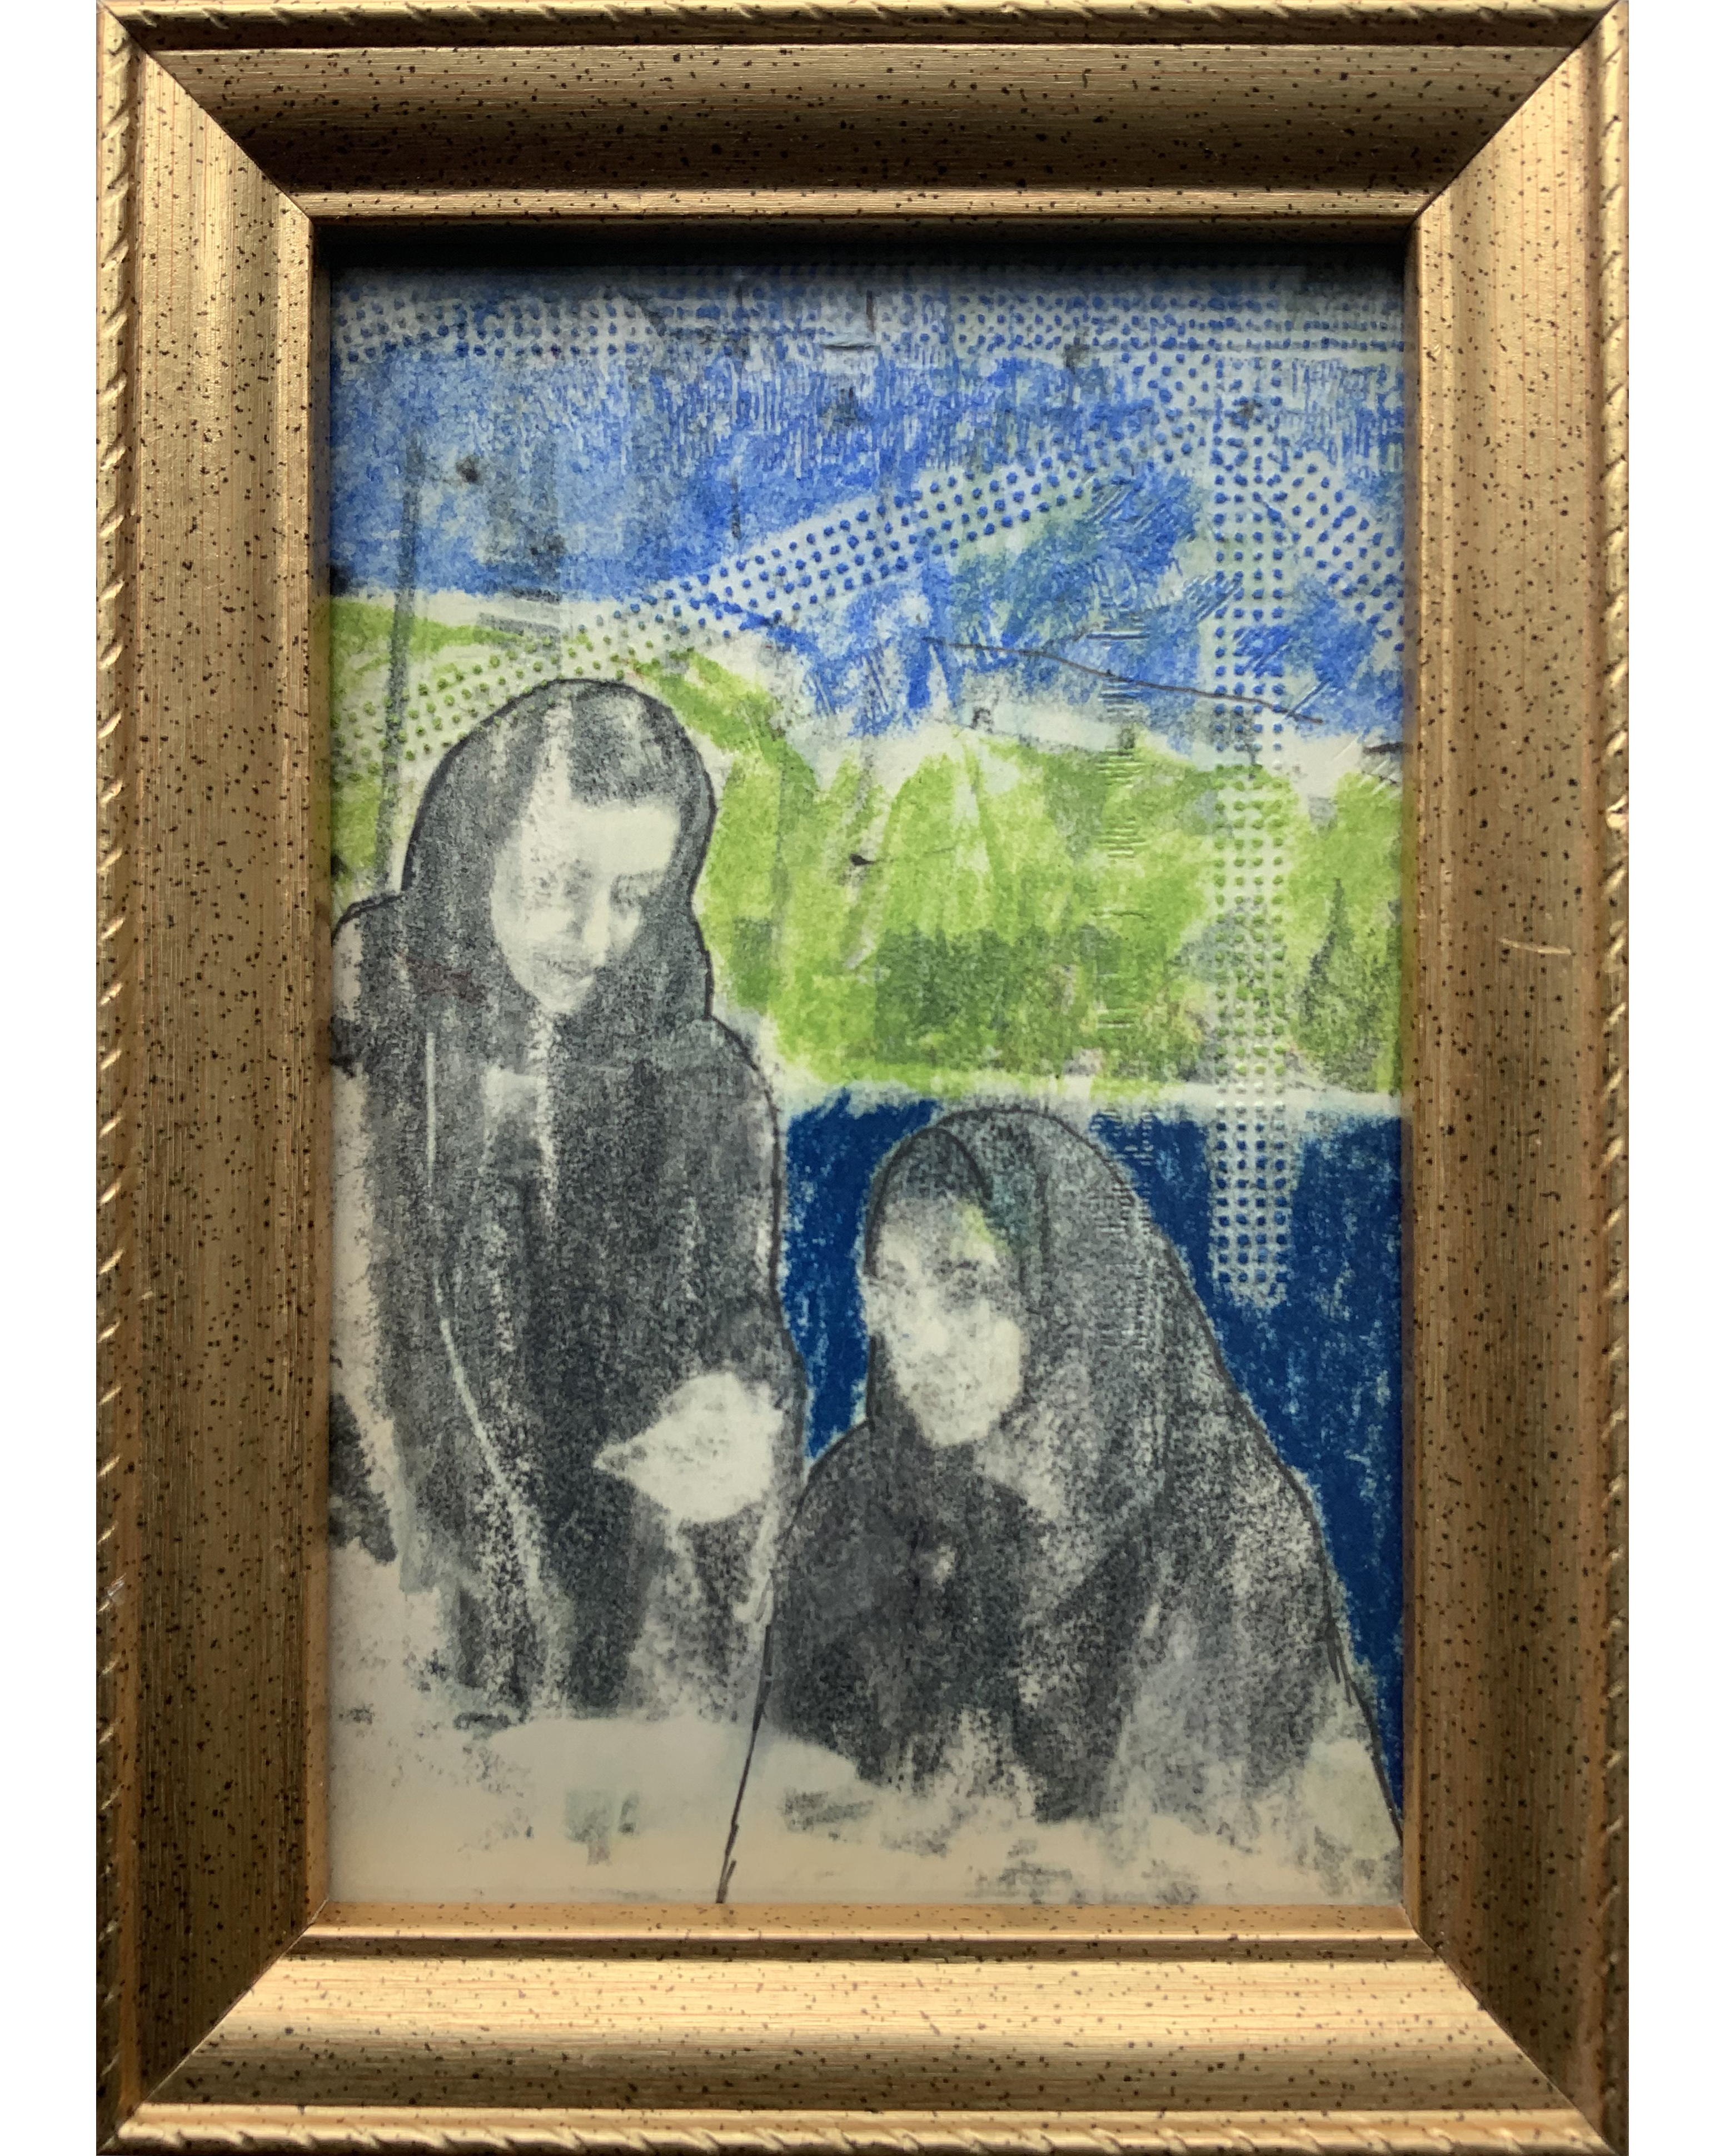 small work on paper by Noel hefele of two women by a lakeside